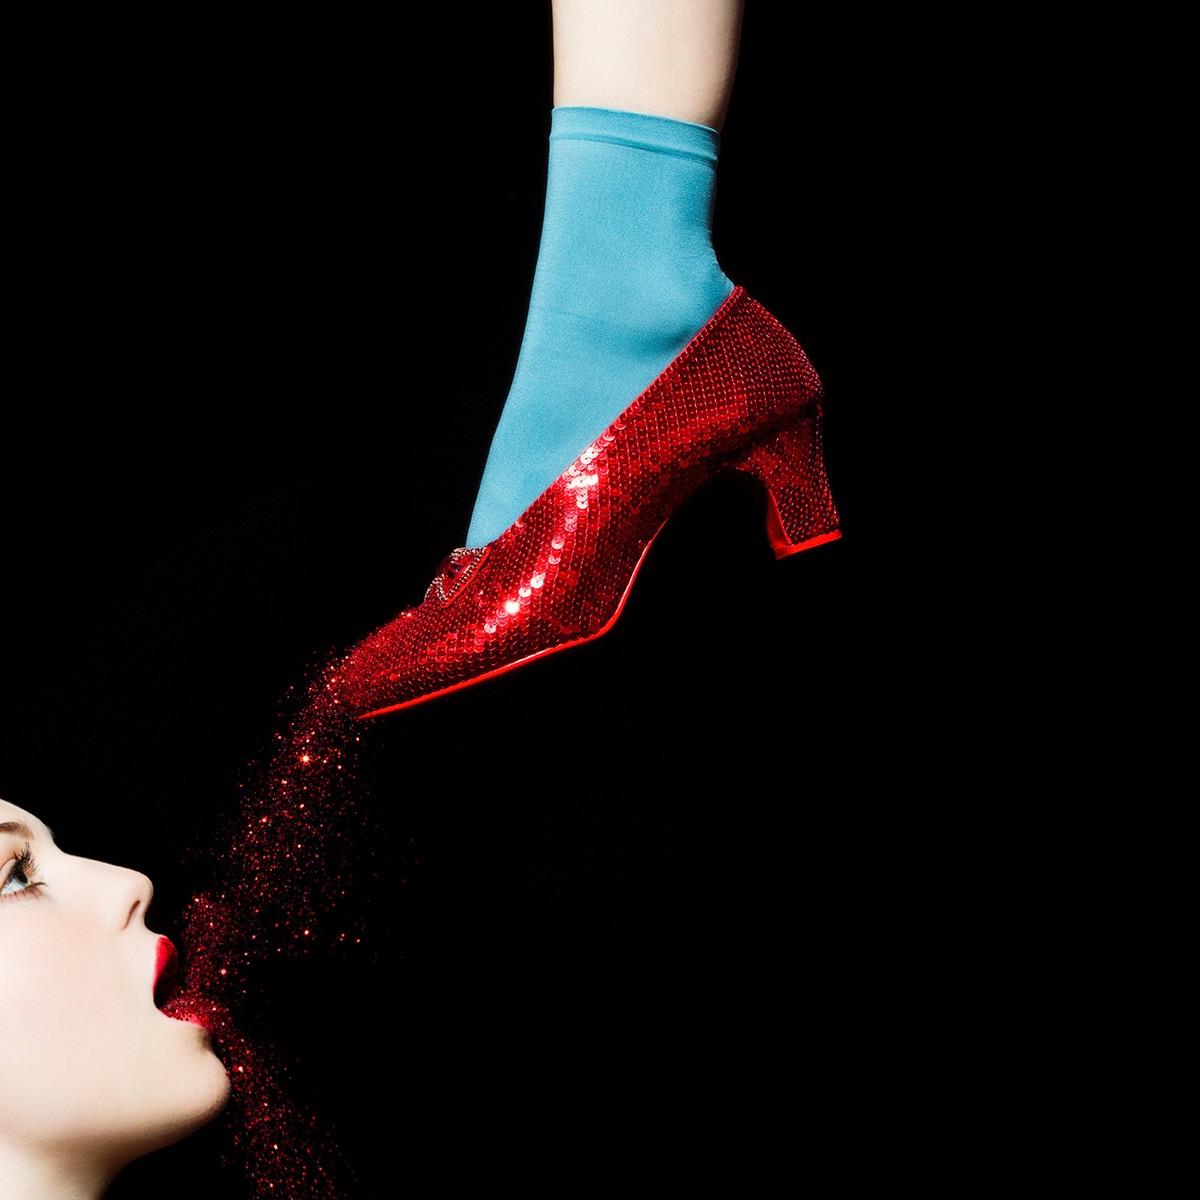 Tyler Shields - Ruby Slippers, Photography 2019